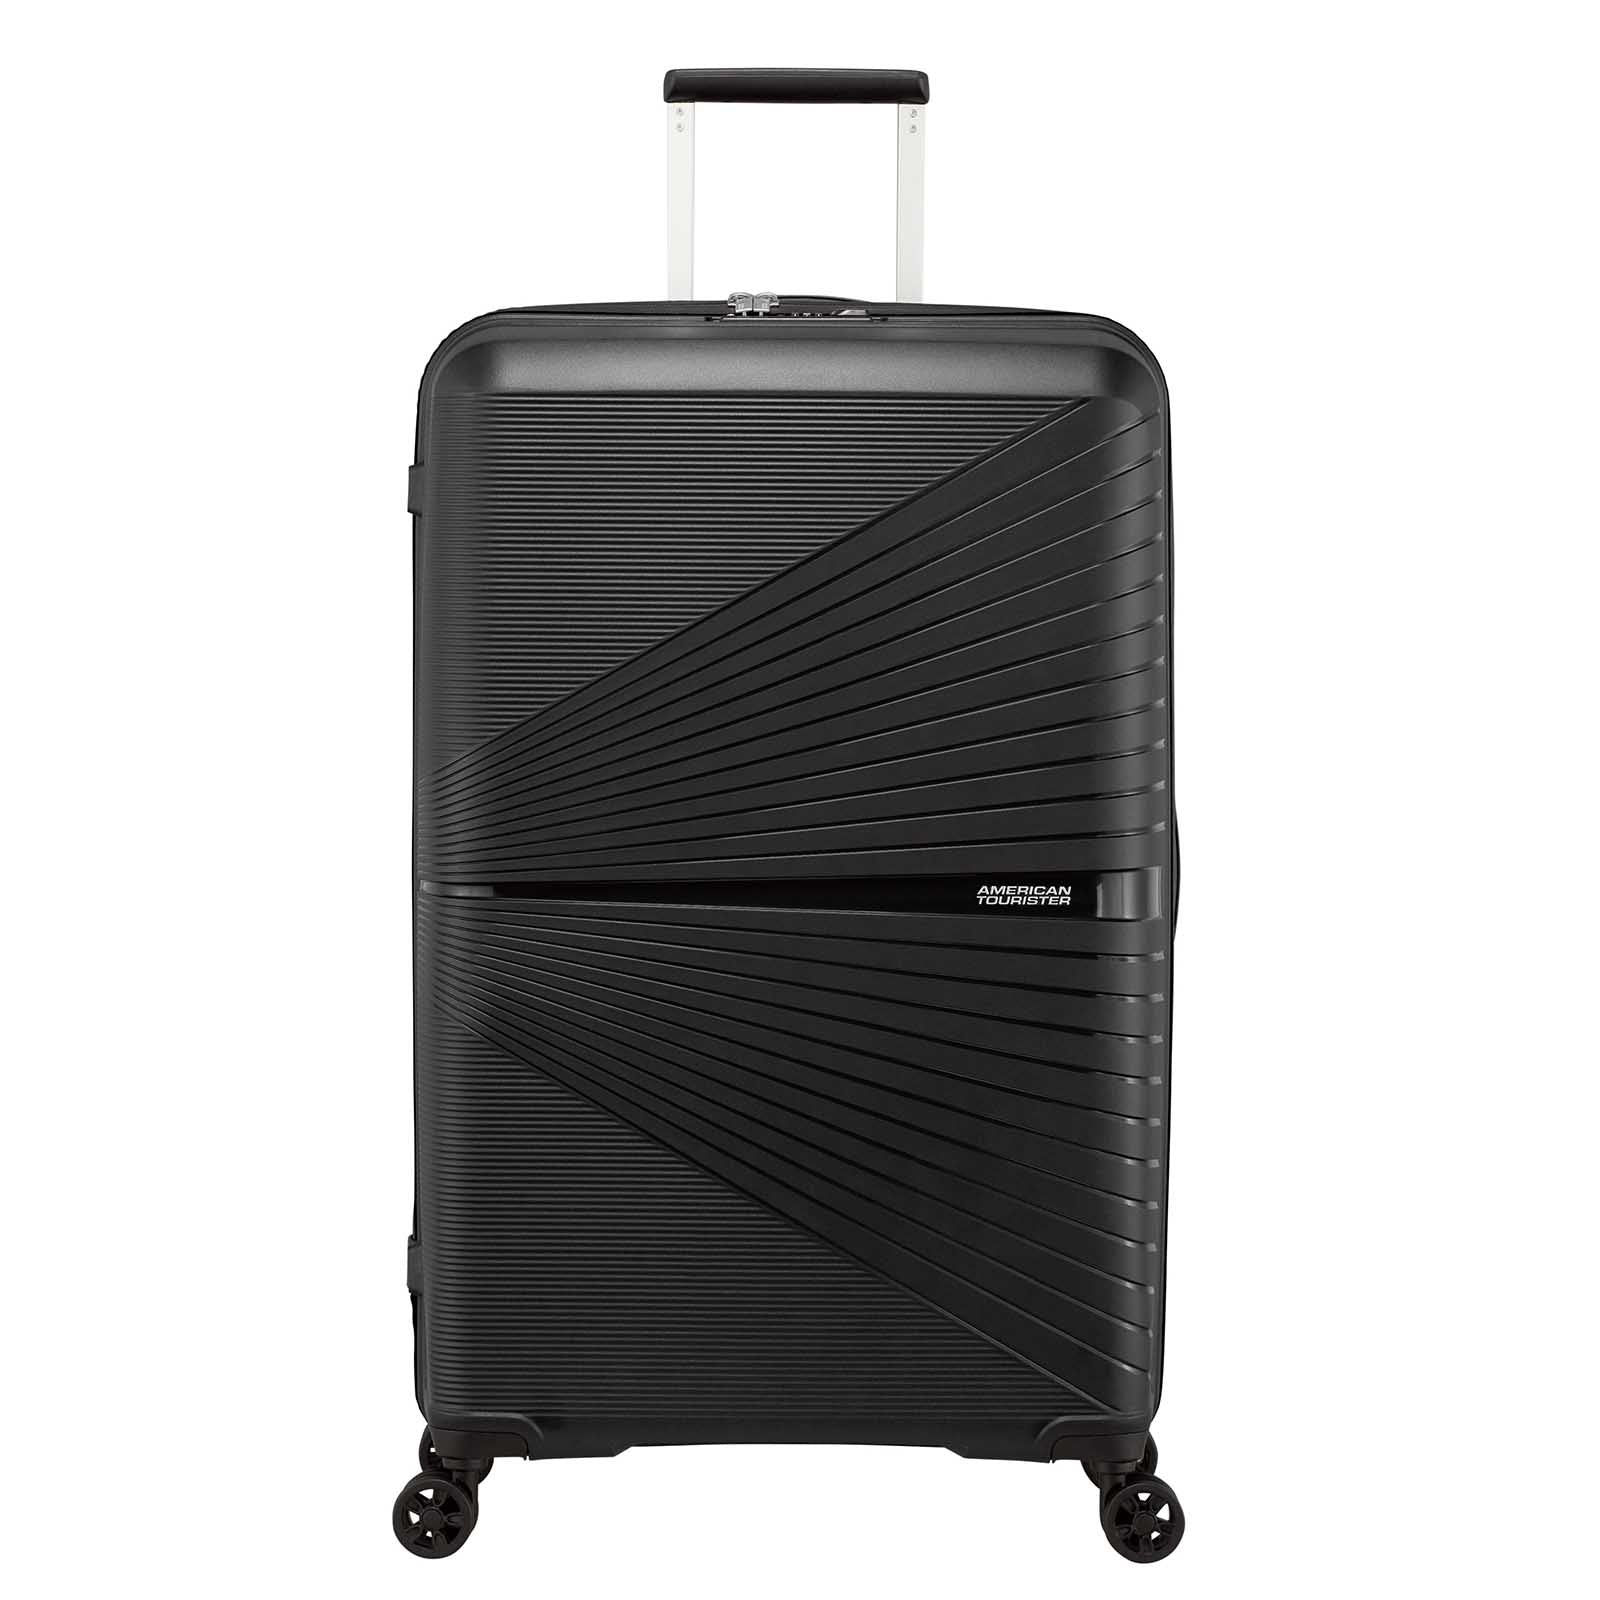 American-Tourister-Airconic-77cm-Suitcase-Onyx-Black-Front